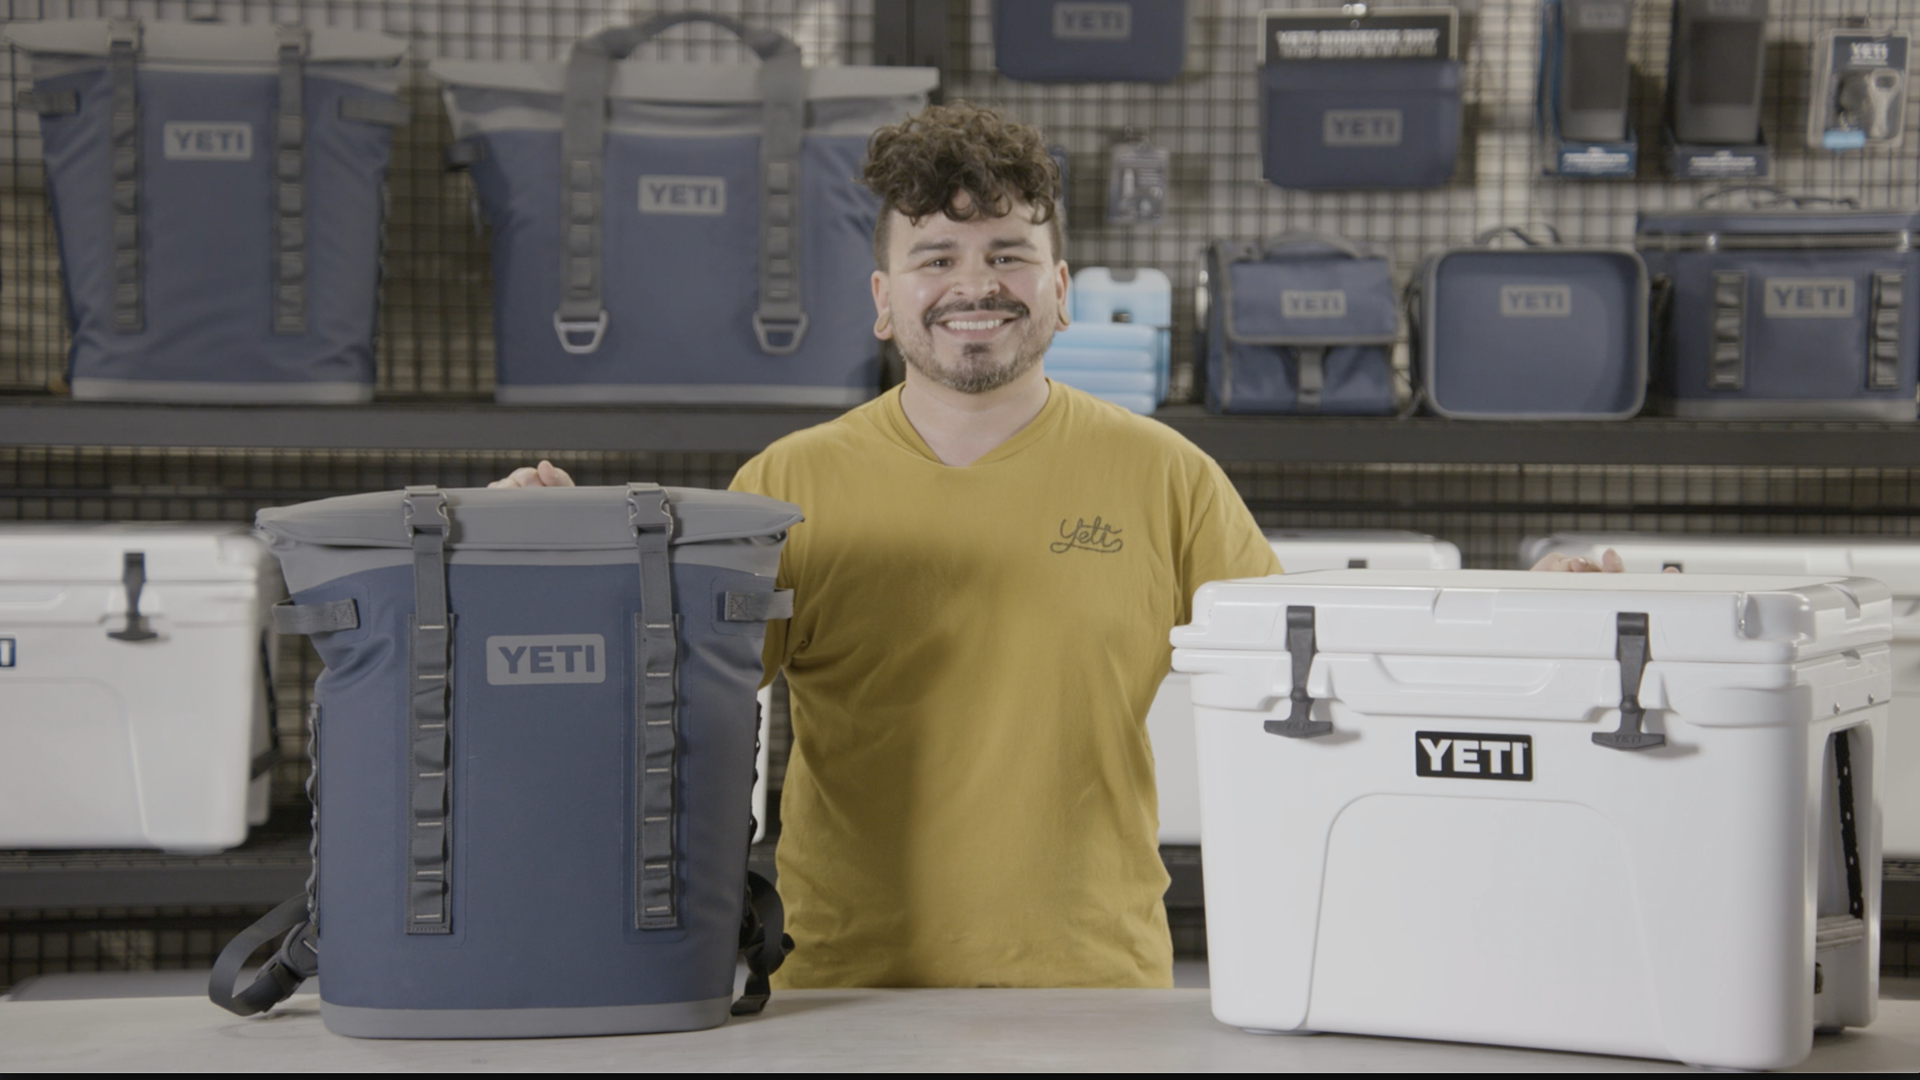 Load video: Meet the Yeti cooler lineup